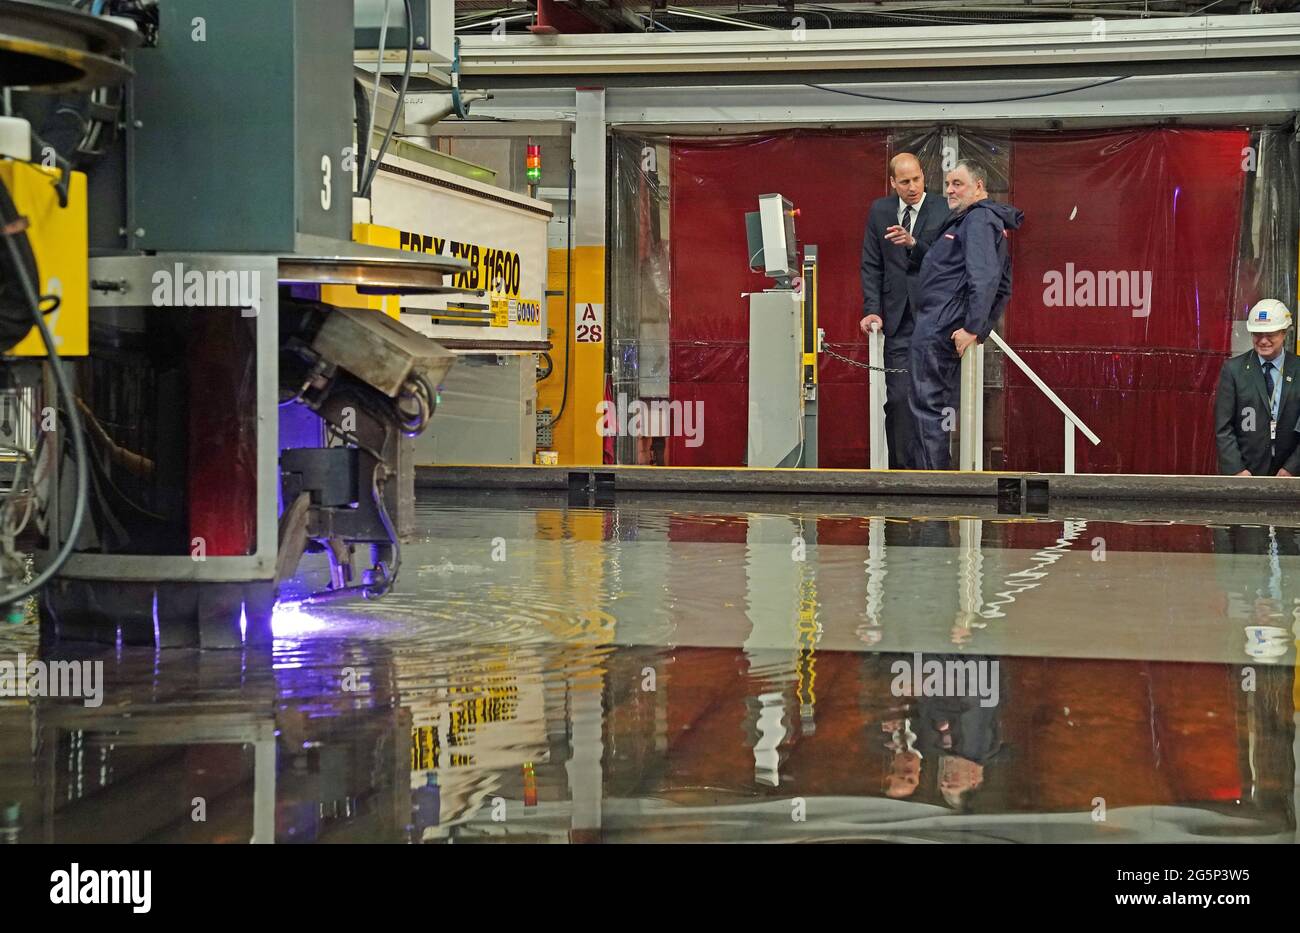 The Duke of Cambridge, known as the Earl of Strathearn in Scotland, watches with Alex Clark during a steel-cutting ceremony while on a visit to the BAE Systems shipyard in Glasgow to see construction on HMS Glasgow - the Royal Navy's first City-class Type 26 frigate. Picture date: Tuesday June 29, 2021. Stock Photo